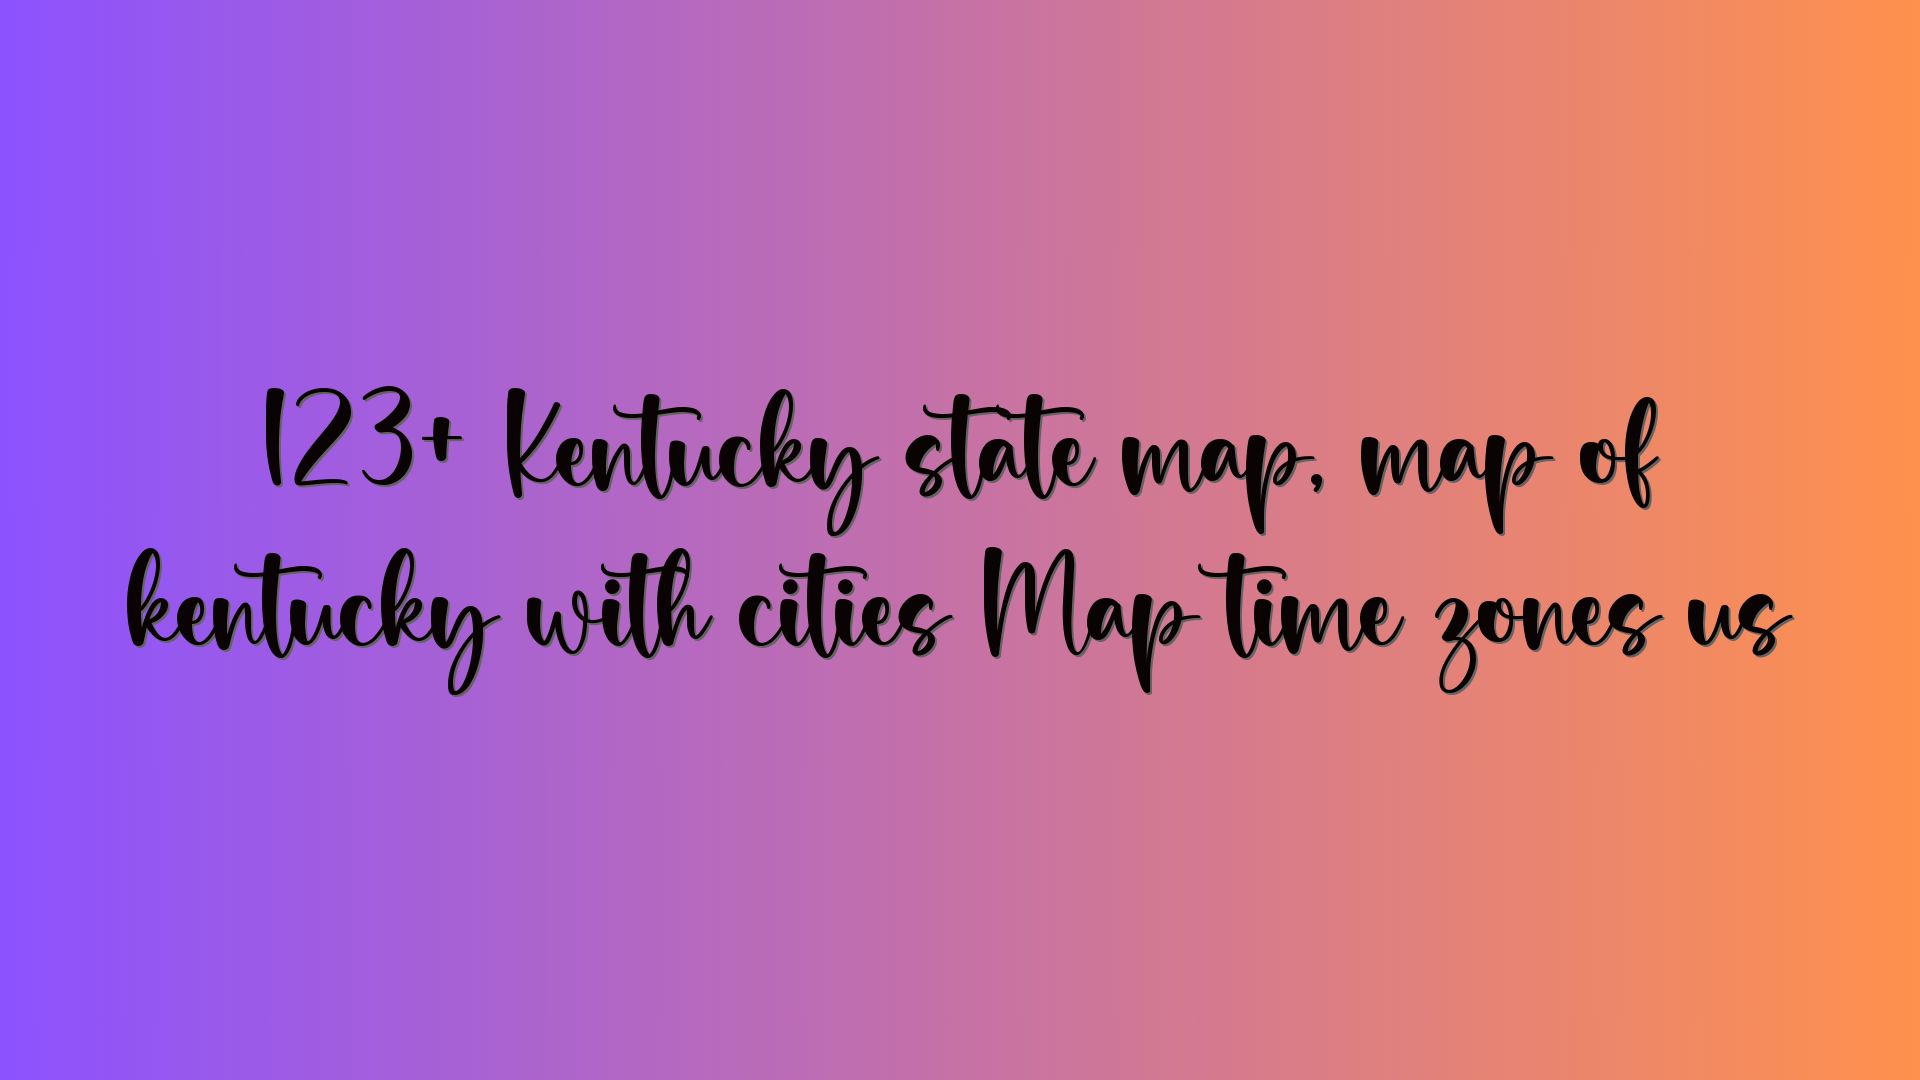 123+ Kentucky state map, map of kentucky with cities Map time zones us